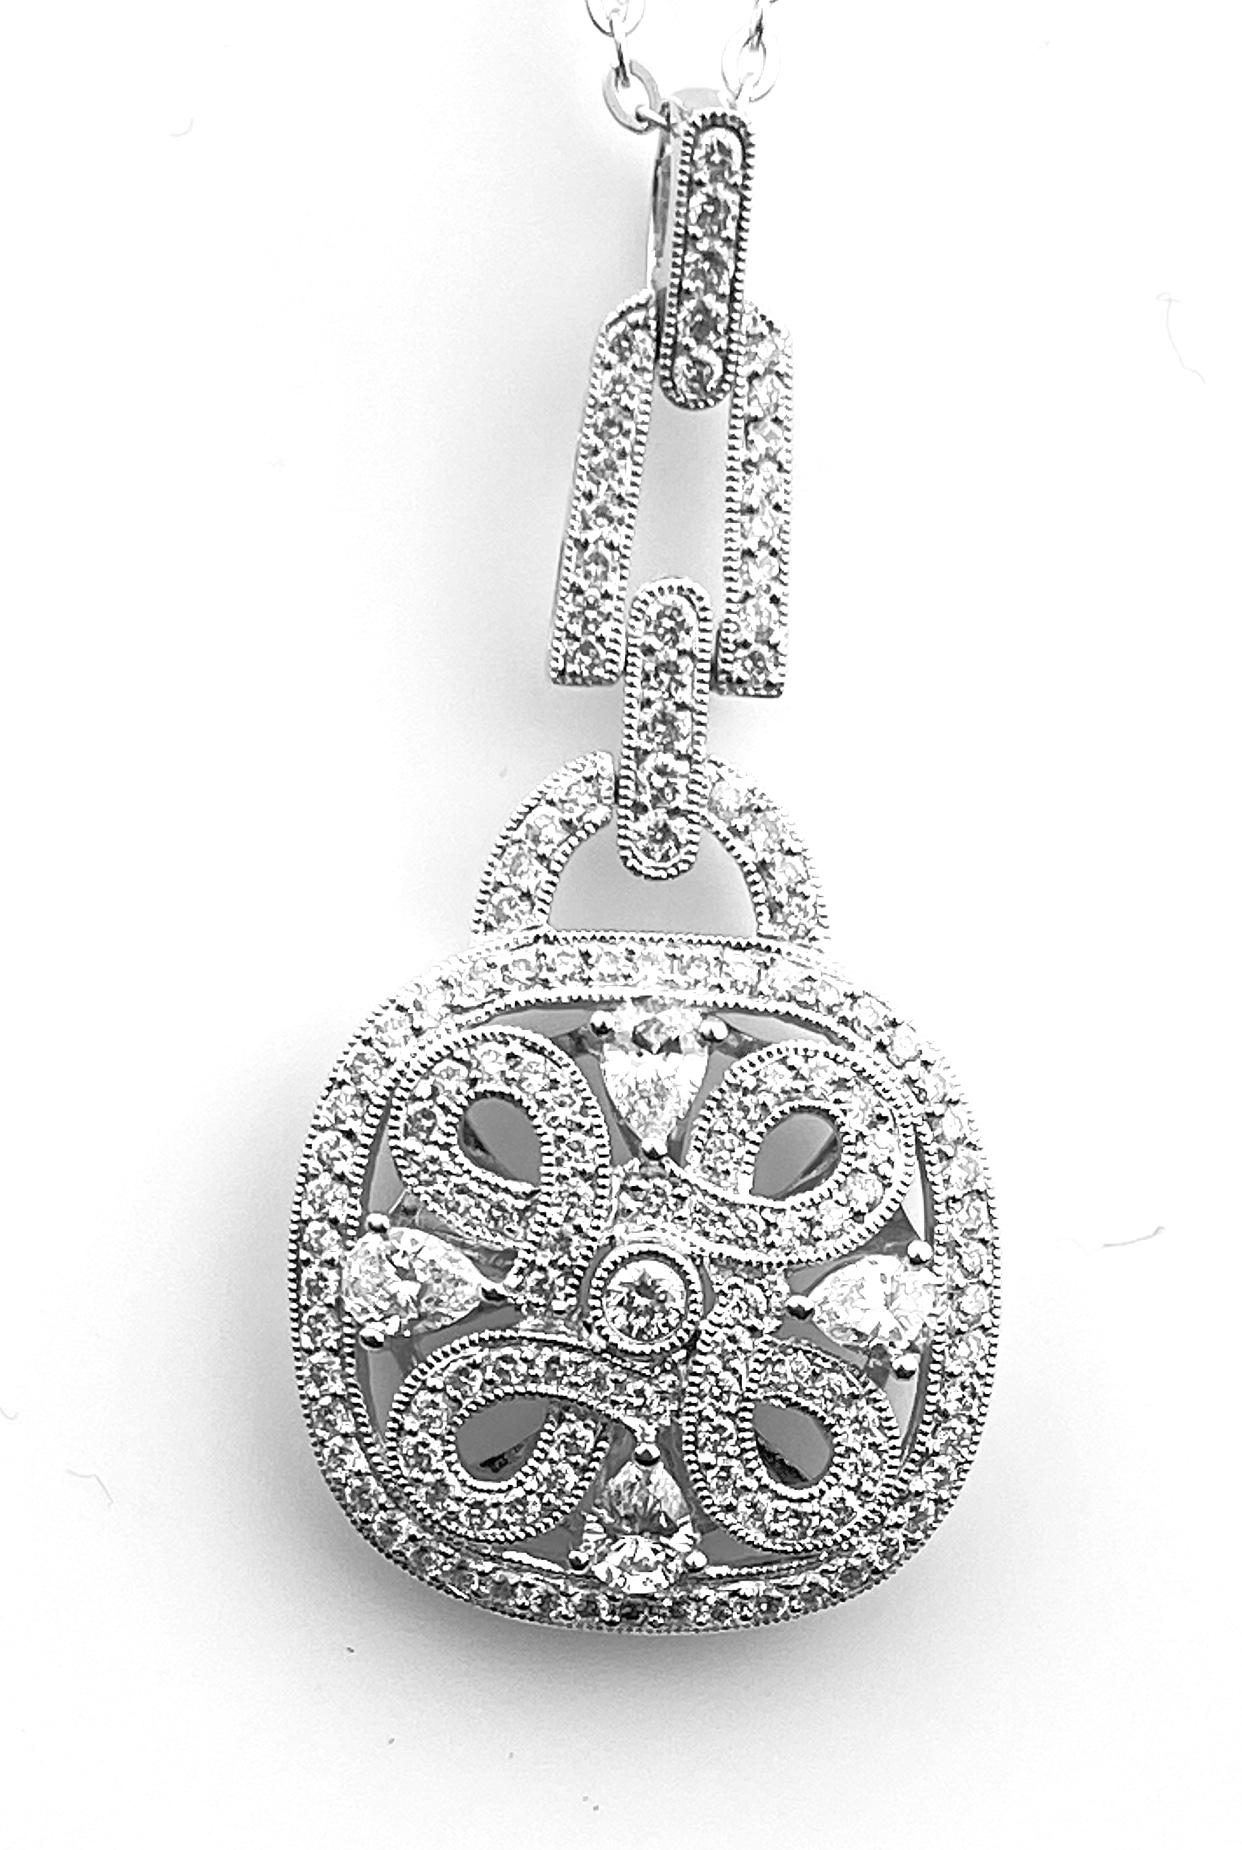 Ladies' antique style Crivelli diamond medallion pendant necklace with a quatrefoil design. Set in 18kt white gold micro-set with 135 pear-cut and round brilliant diamonds of 1.30ct total. On 18